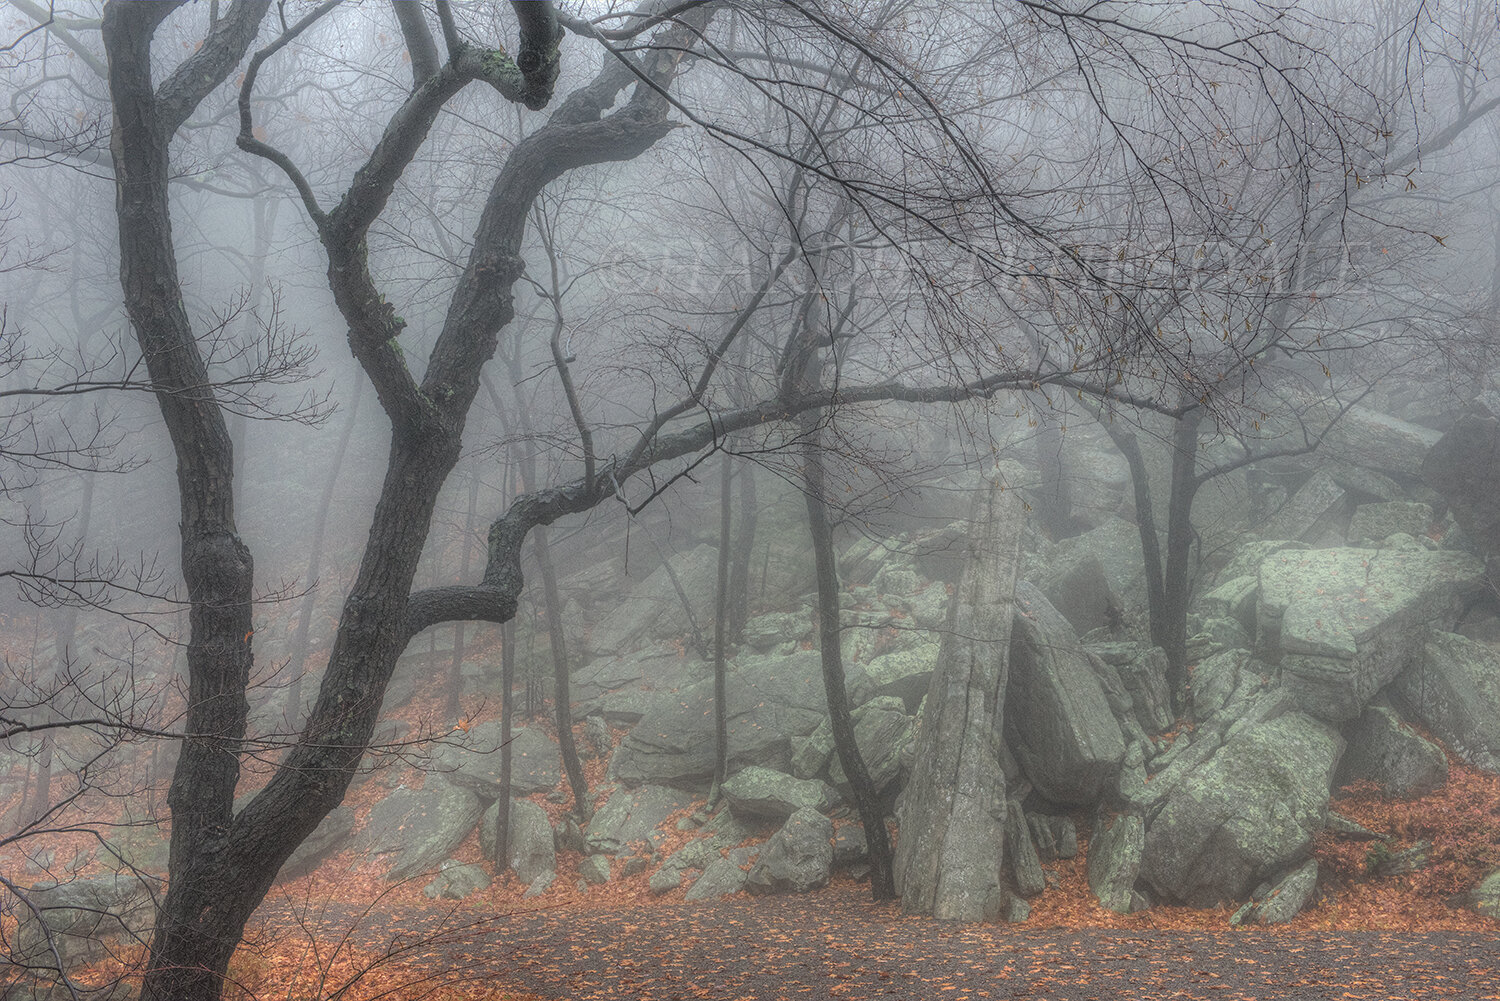 Gks#895 "Talus, Tree, and Fog, Mohonk Preserve"